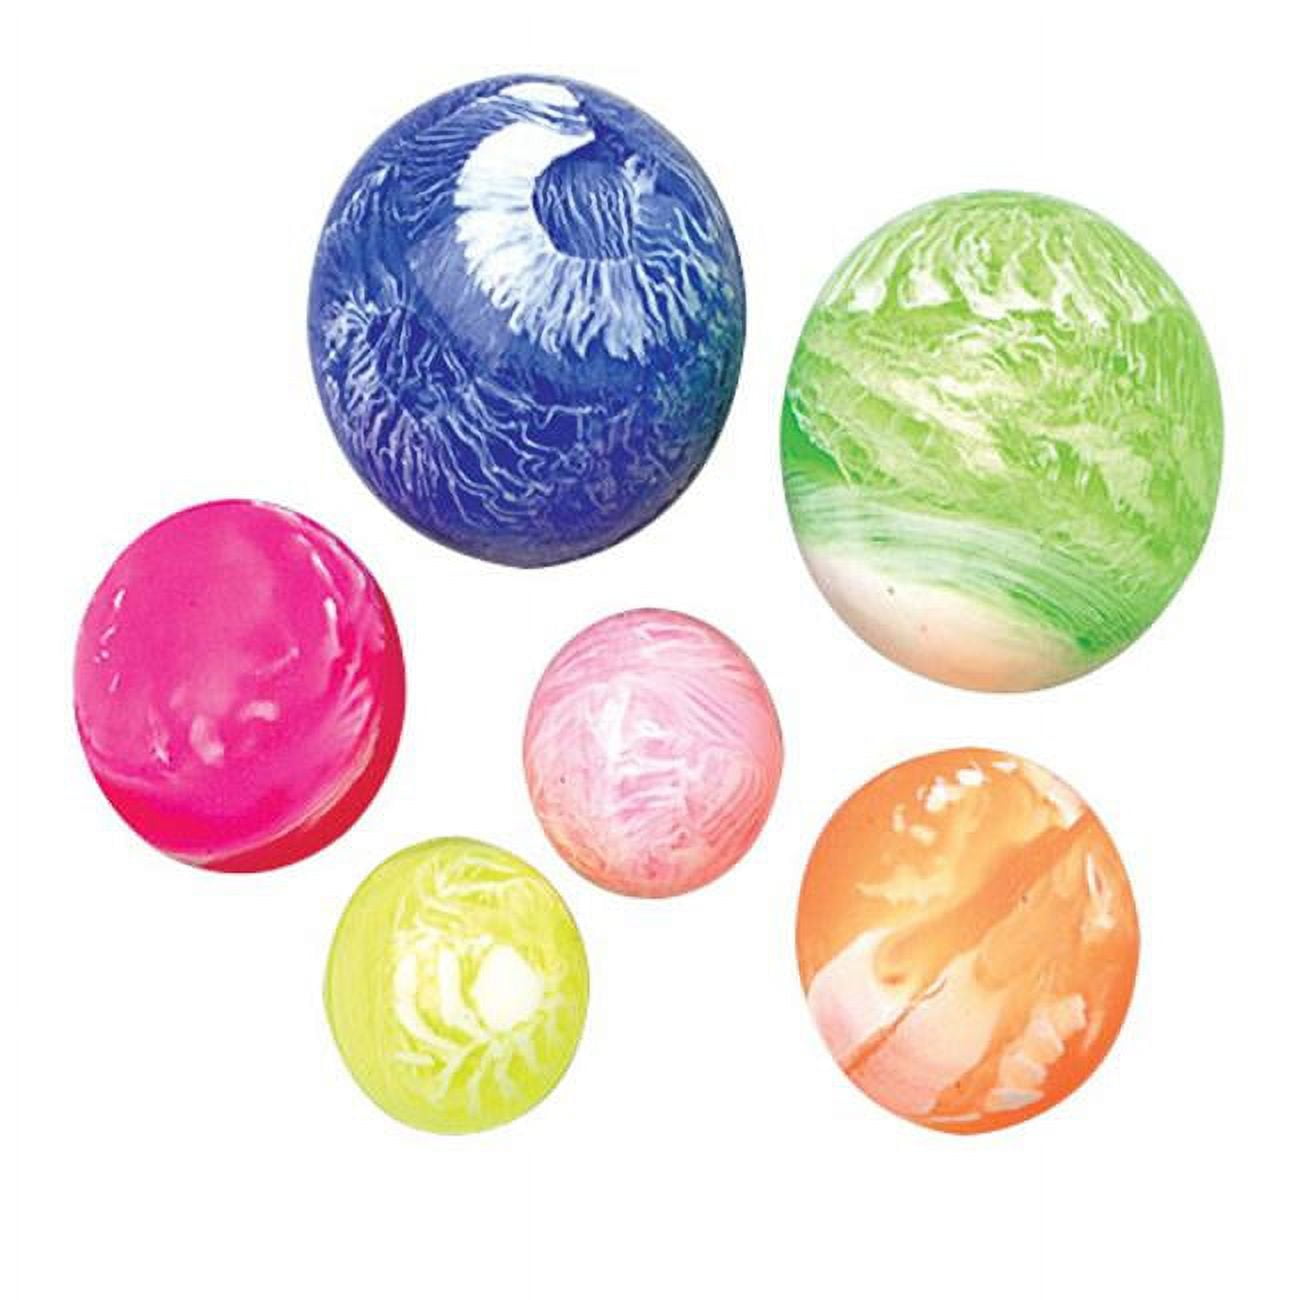 LAST CHANCE - LIMITED STOCK - SALE - Rubber Band Ball - Fun Bouncy Bal